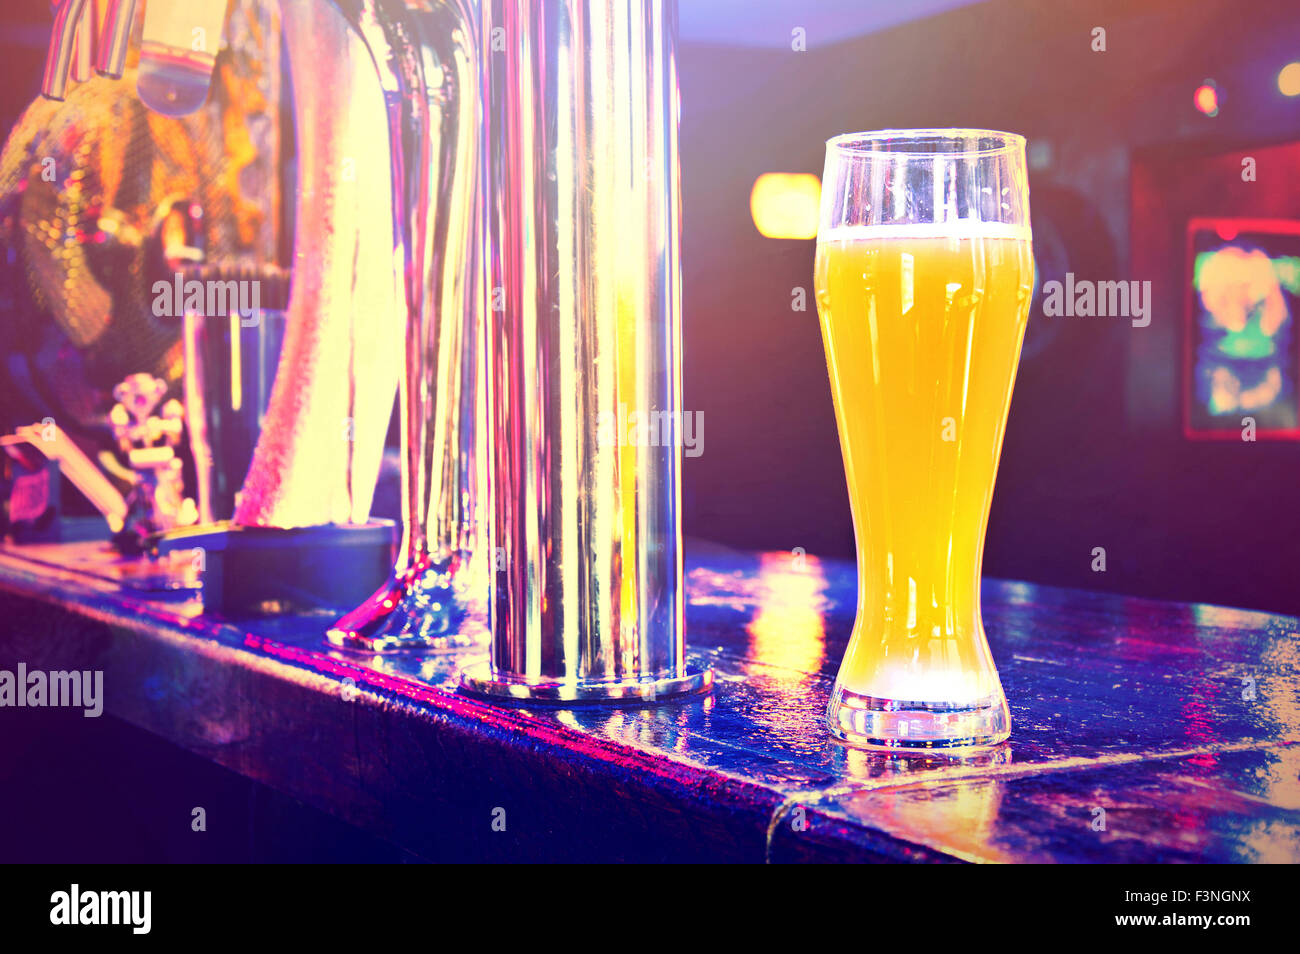 Beer from dispenser. Alcohol conceptual image. Pub. Stock Photo